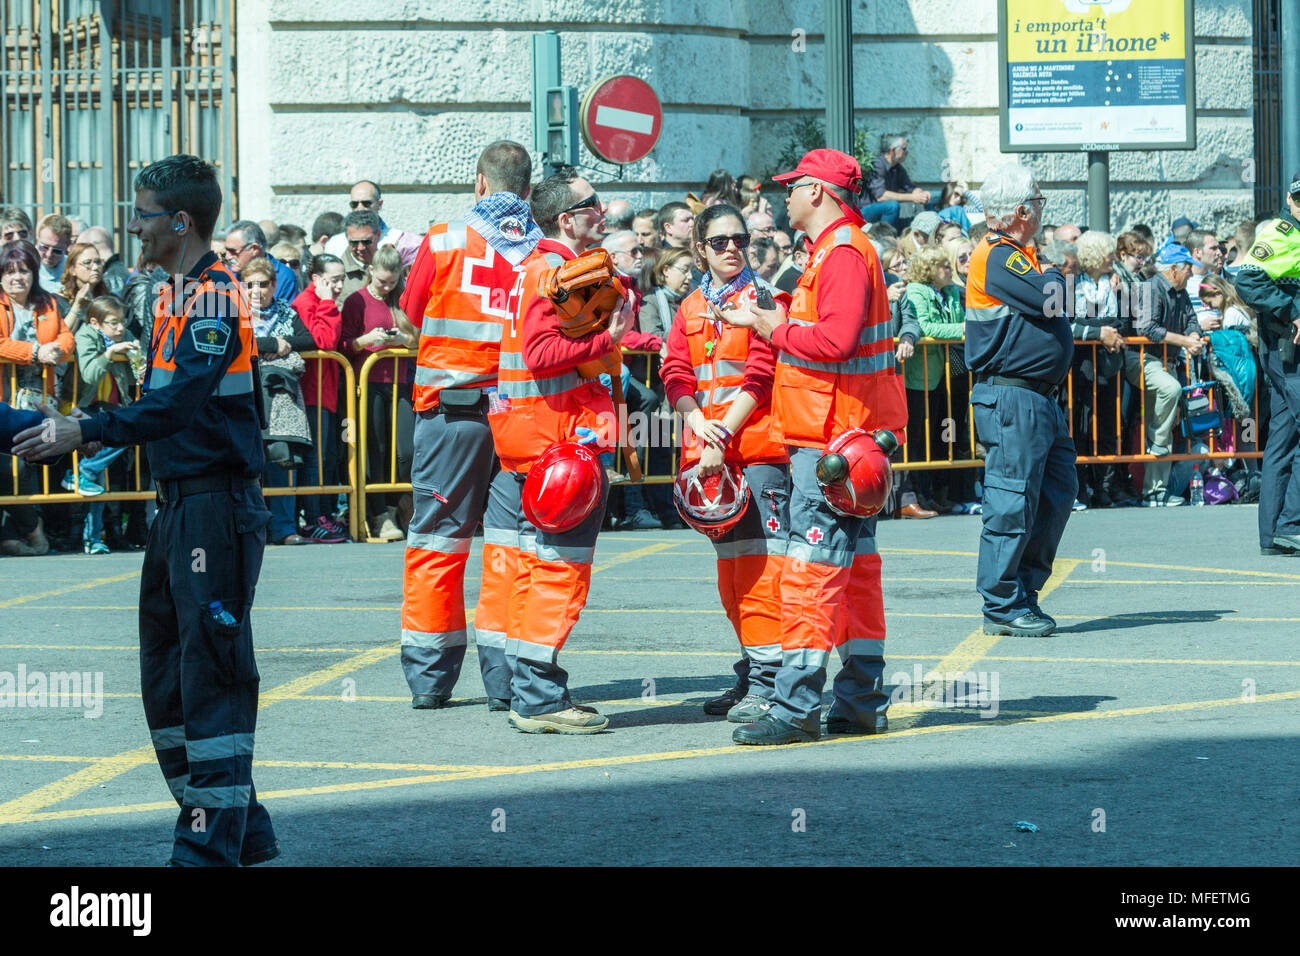 Valencia/Spain - March 17, 2015: First Responders ready themselves for the annual Las Fallas Festival in Valencia Stock Photo